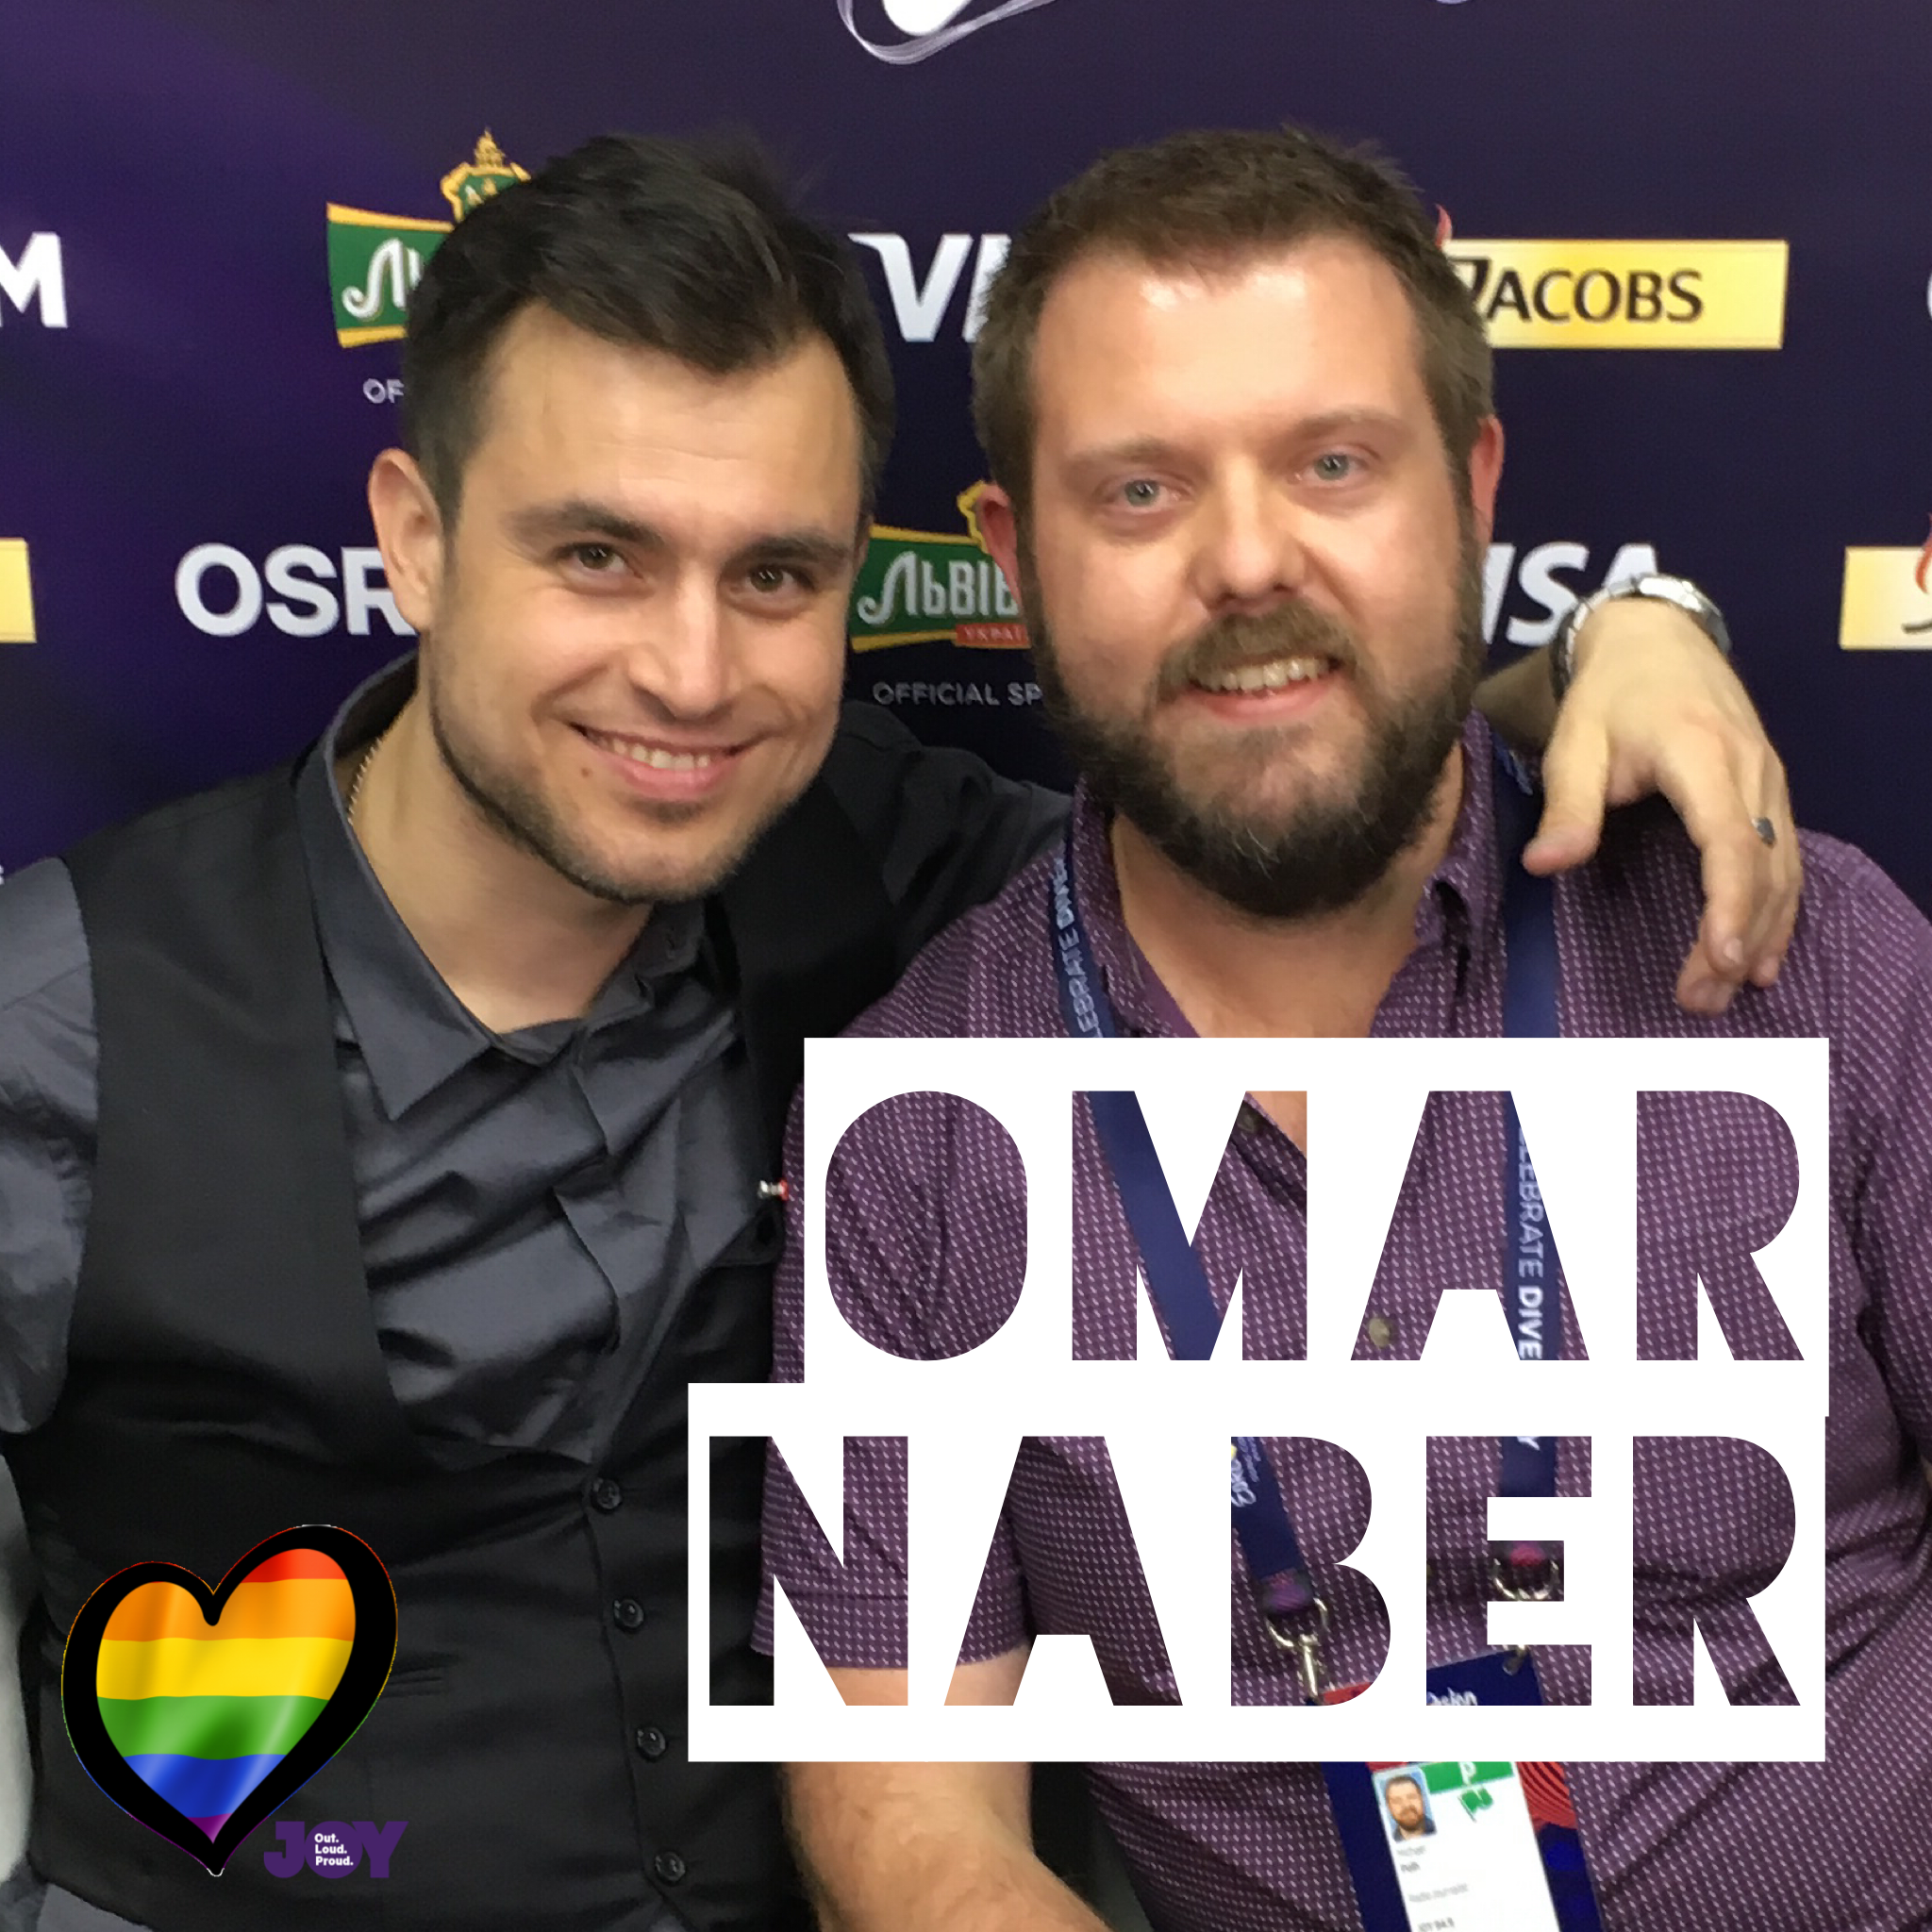 Slovenia: Omar’s On His Way to Rock